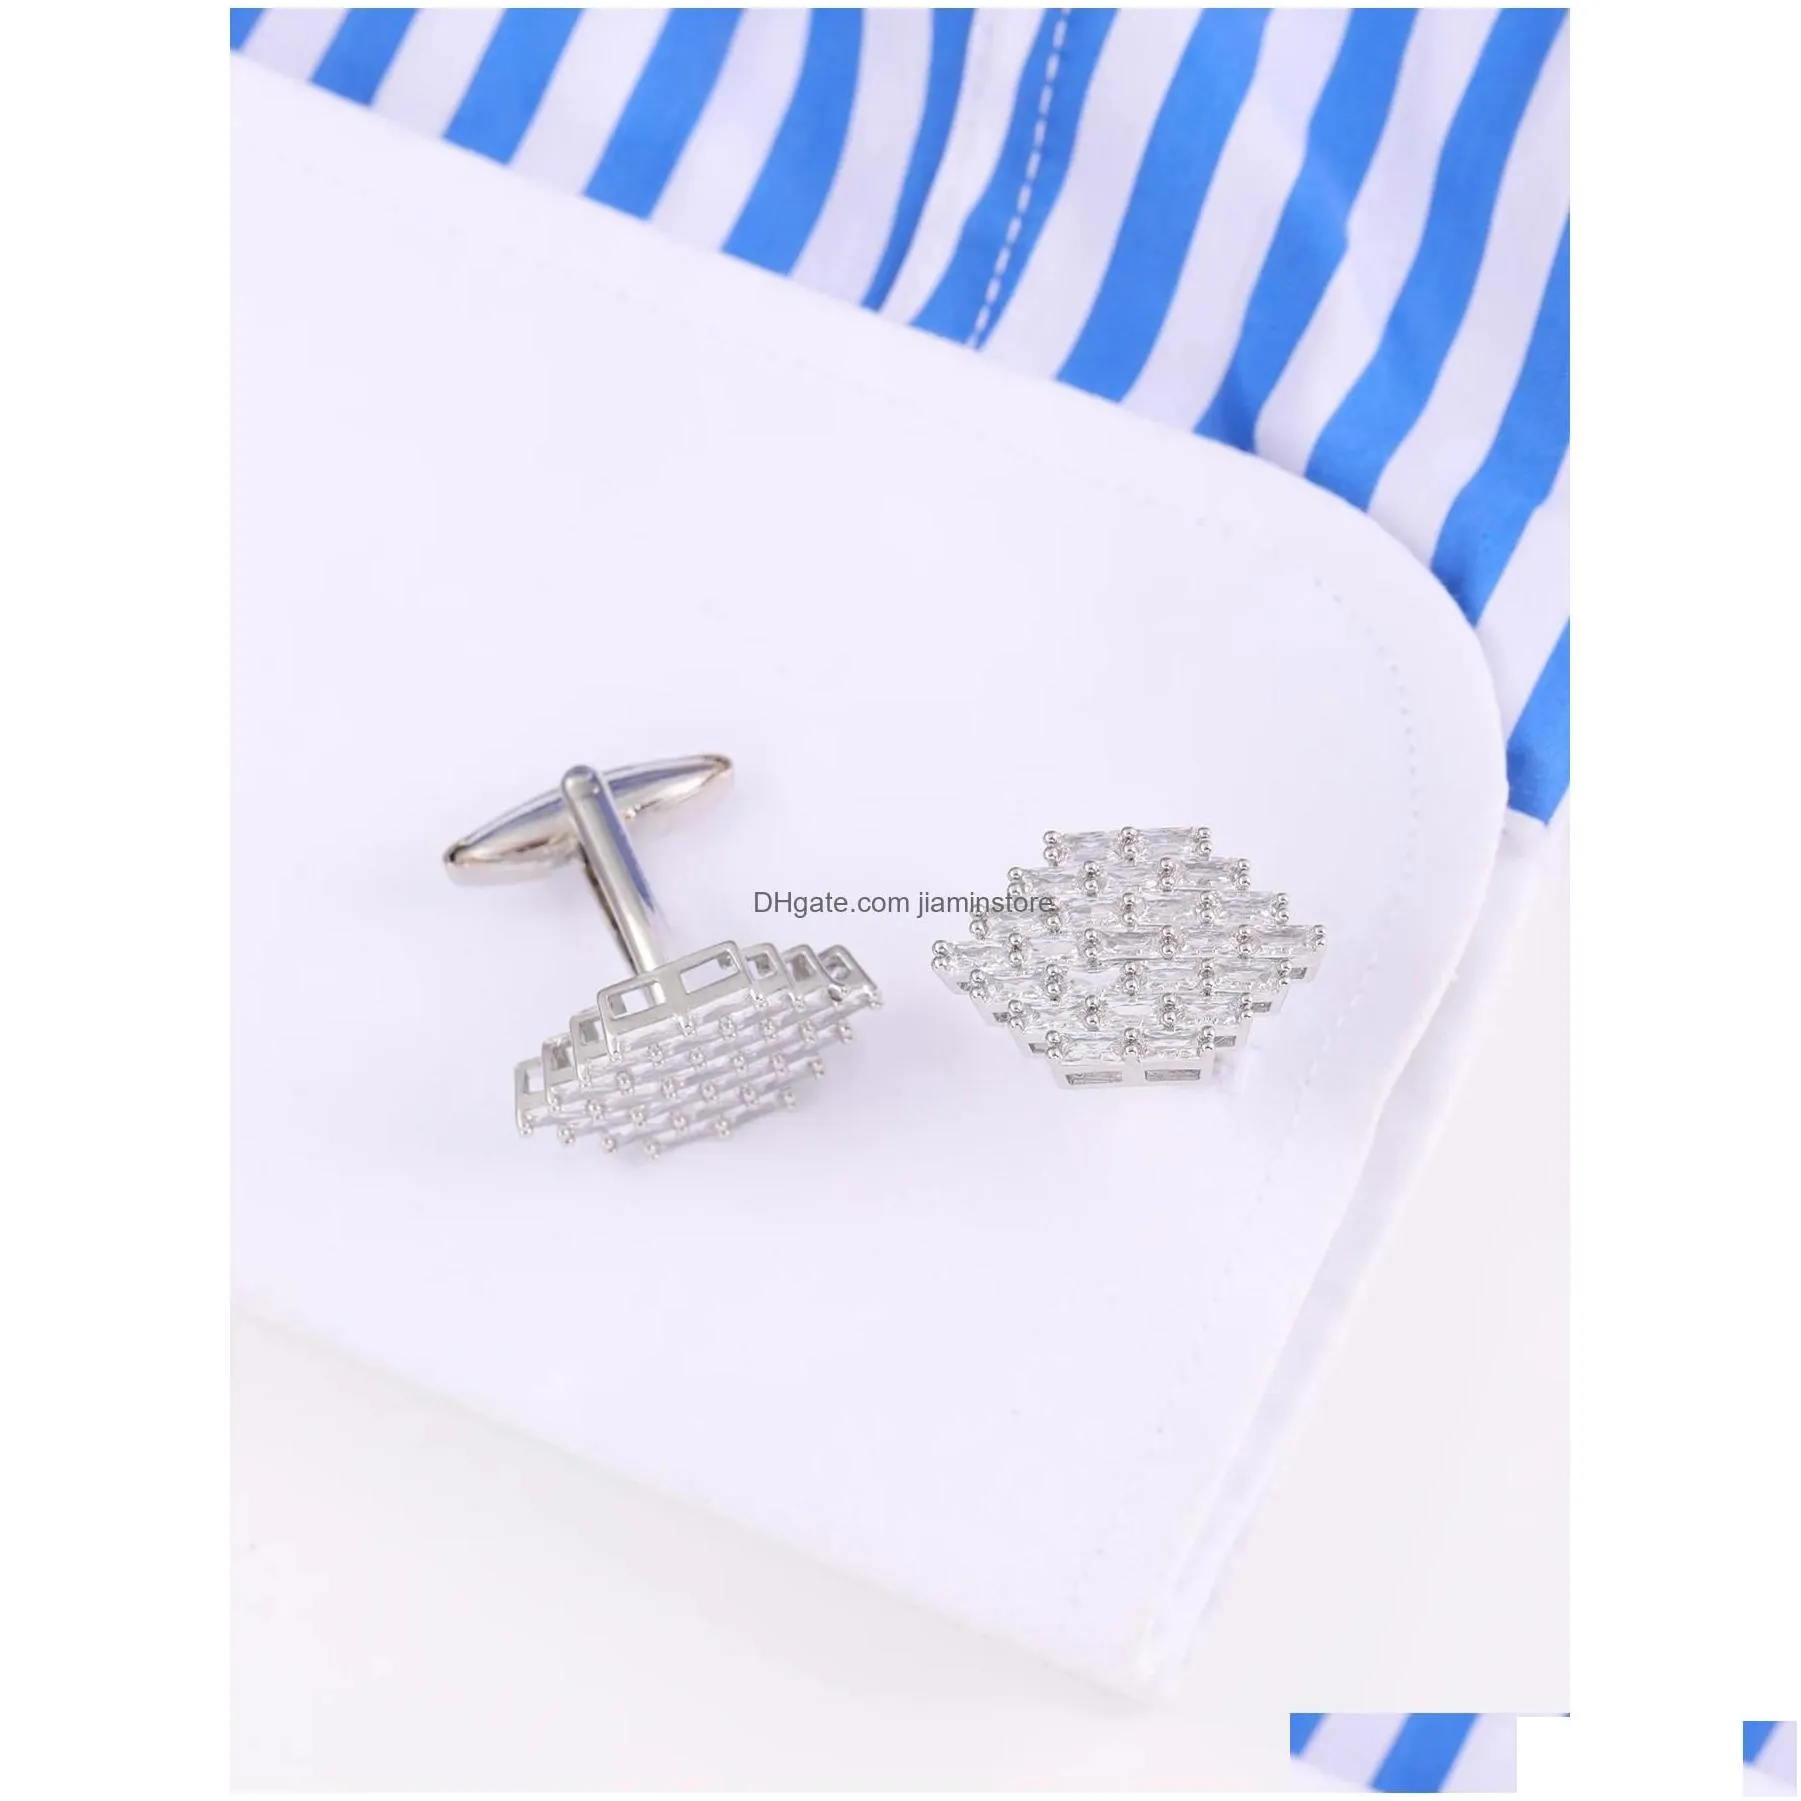 cuff links the rhombus cufflinks with diamond inlay a unique accessory to showcase mens noble character and exquisite taste drop del